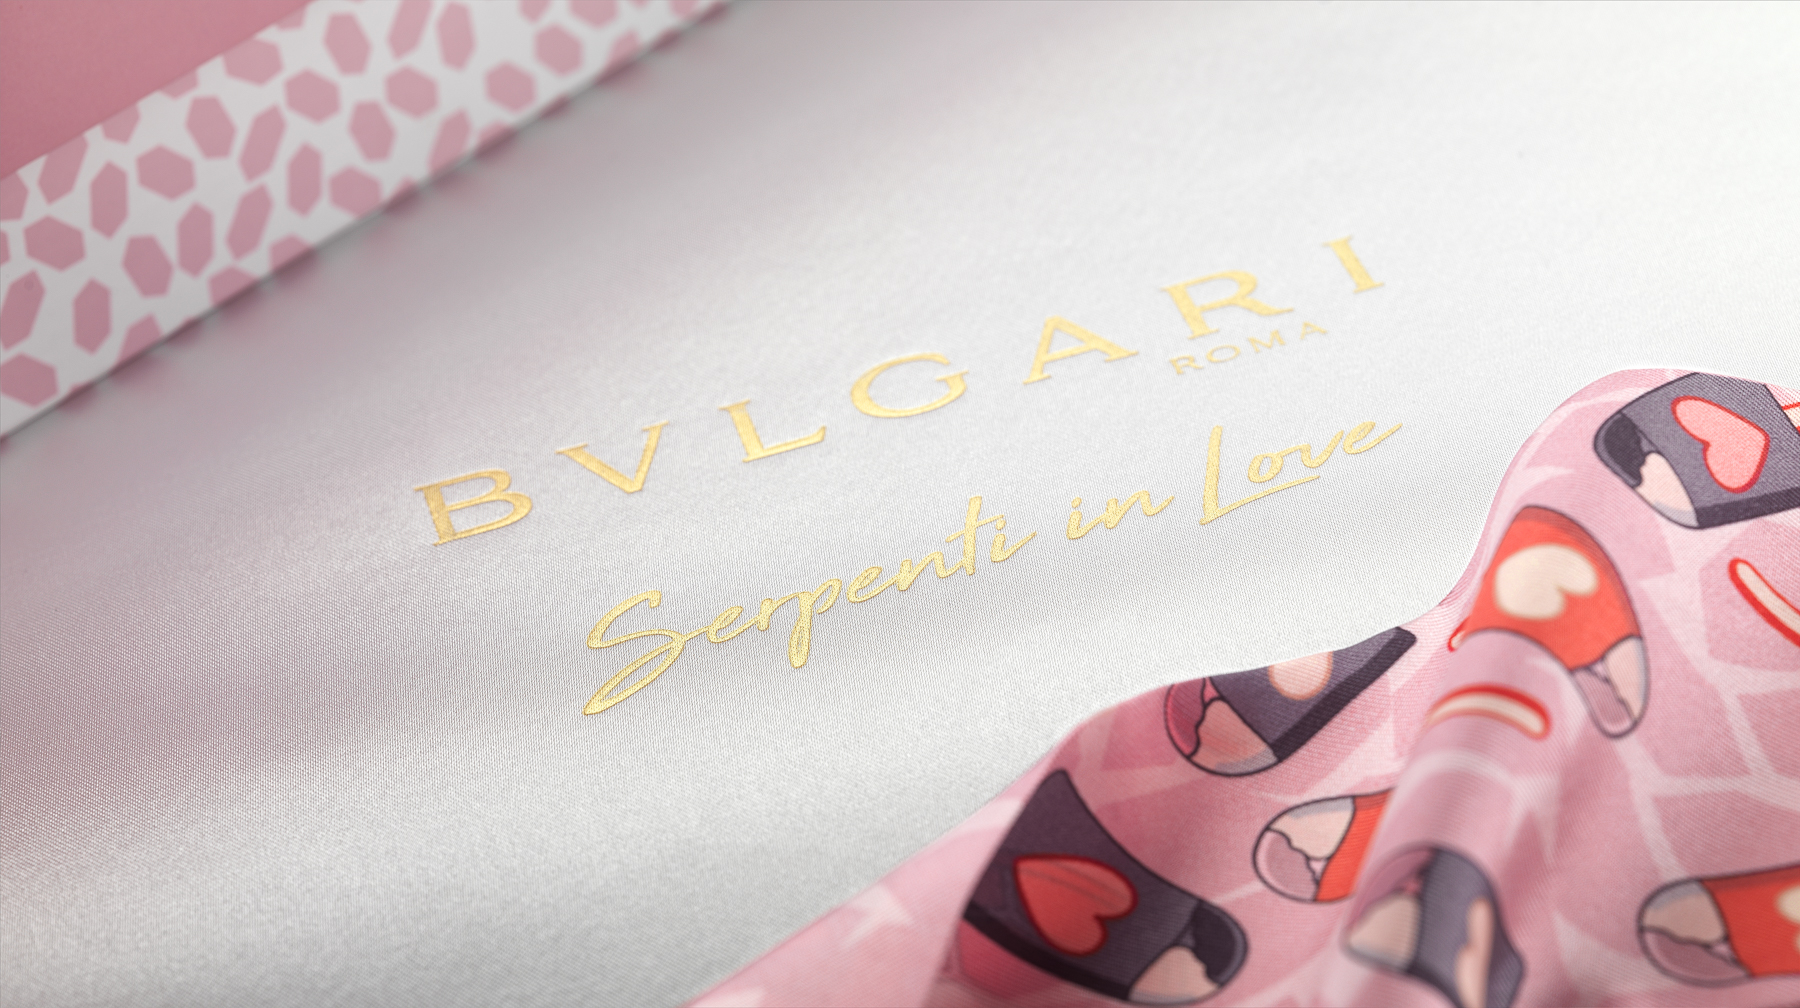 BVLGARI's Sepenti in Love logo and shelley